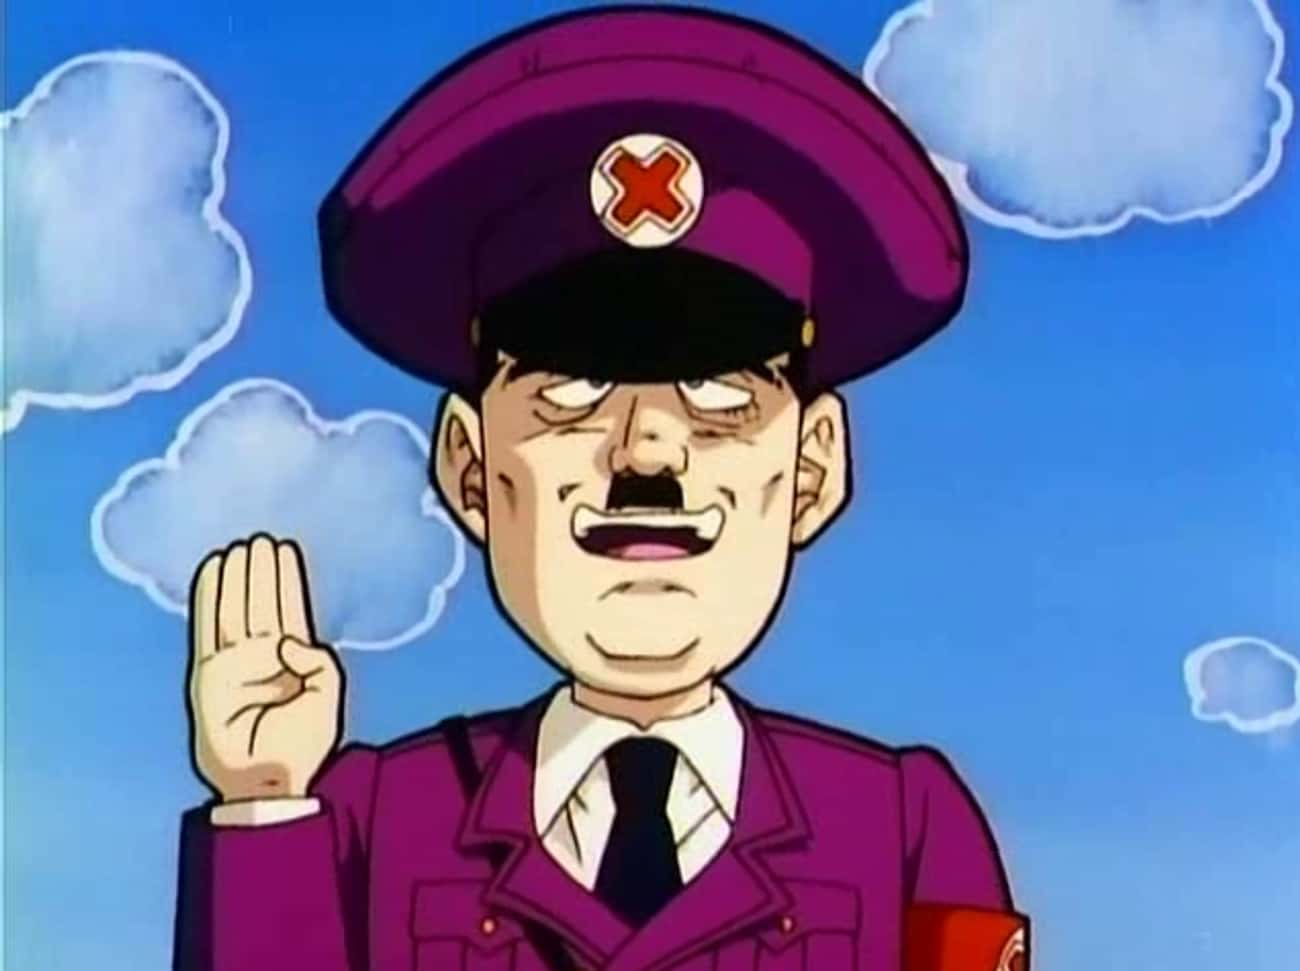 16 Times Hitler Showed Up in Anime